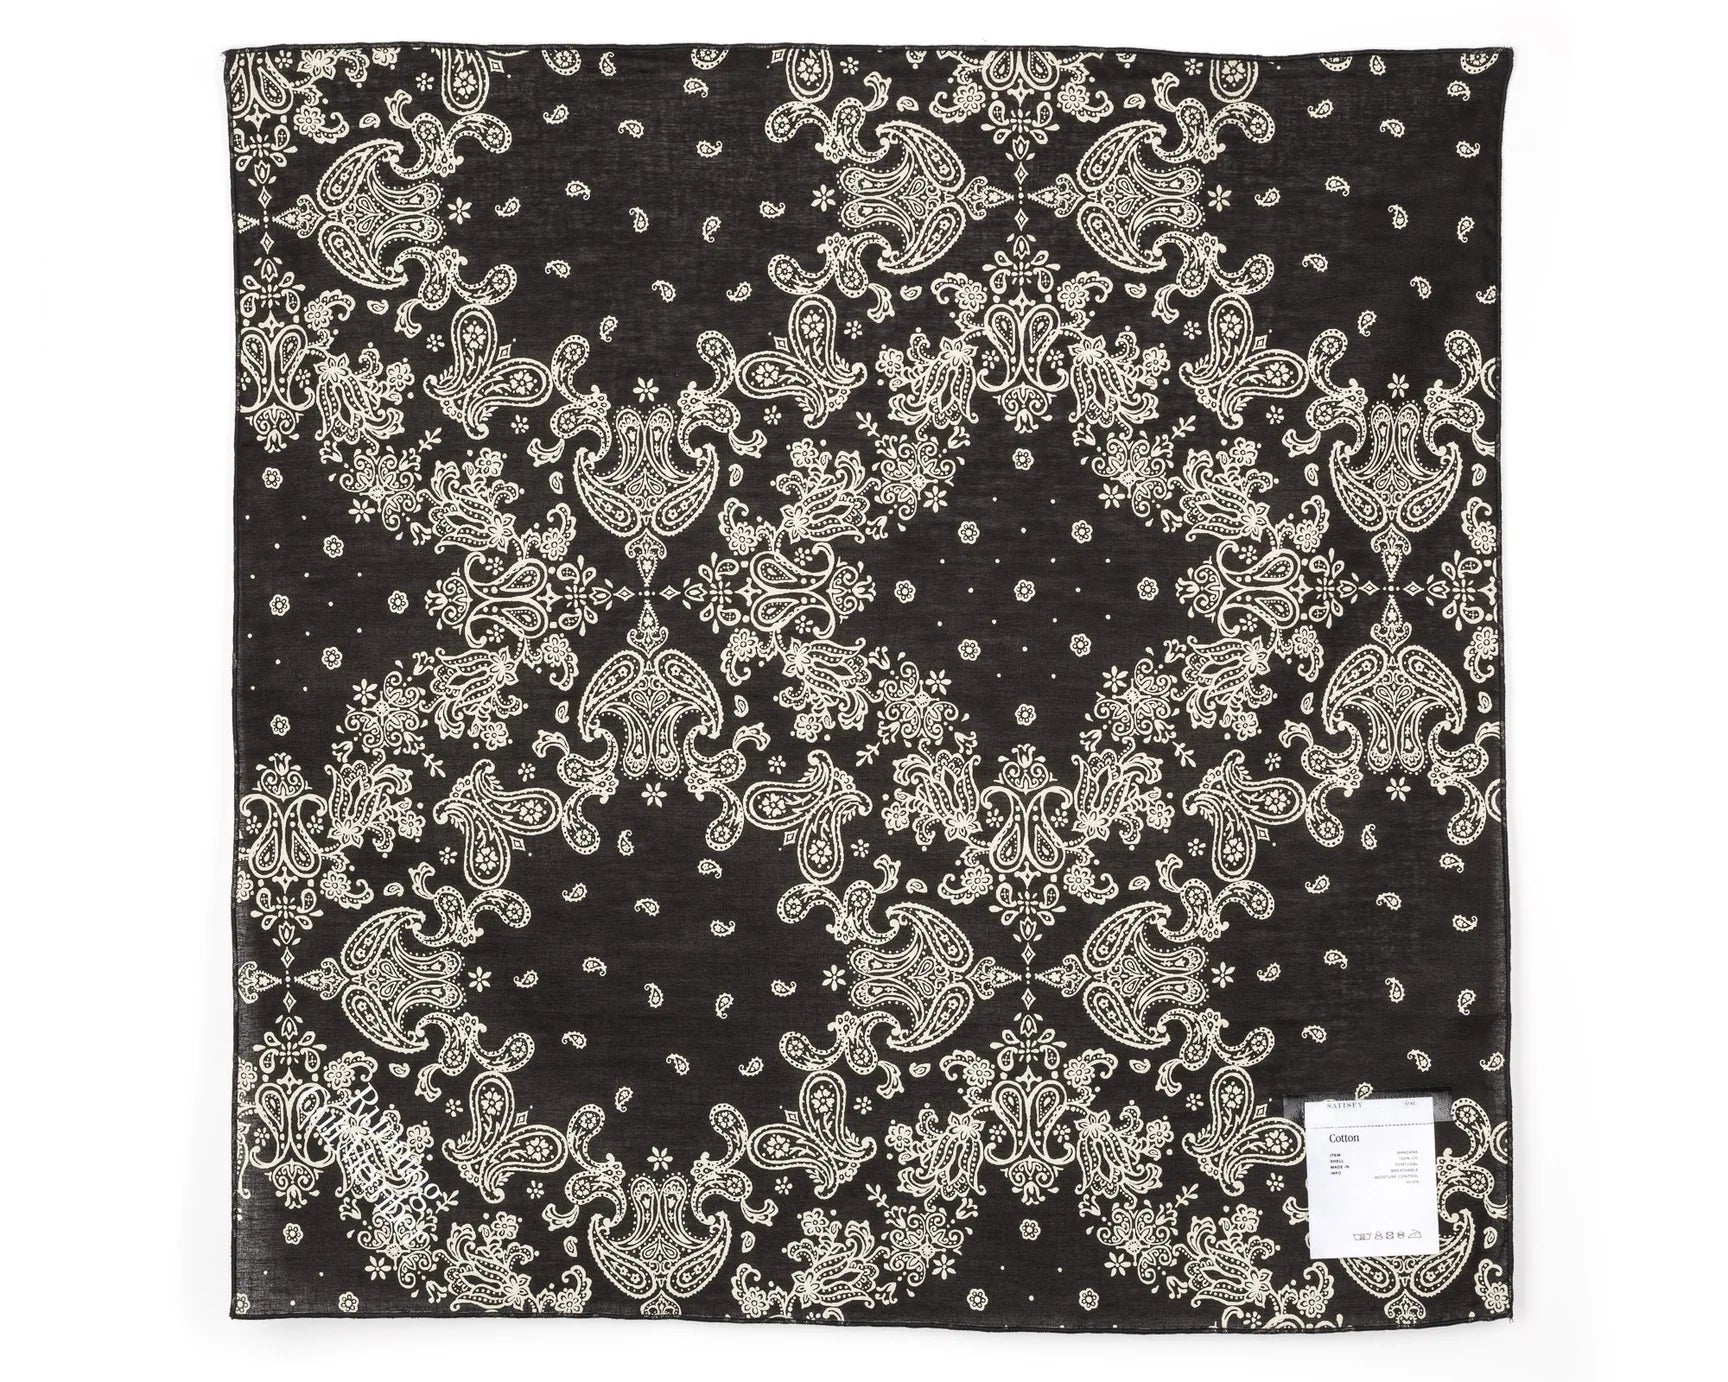 SATISFY - SoftCell™ Bandana - Black - Space Camp